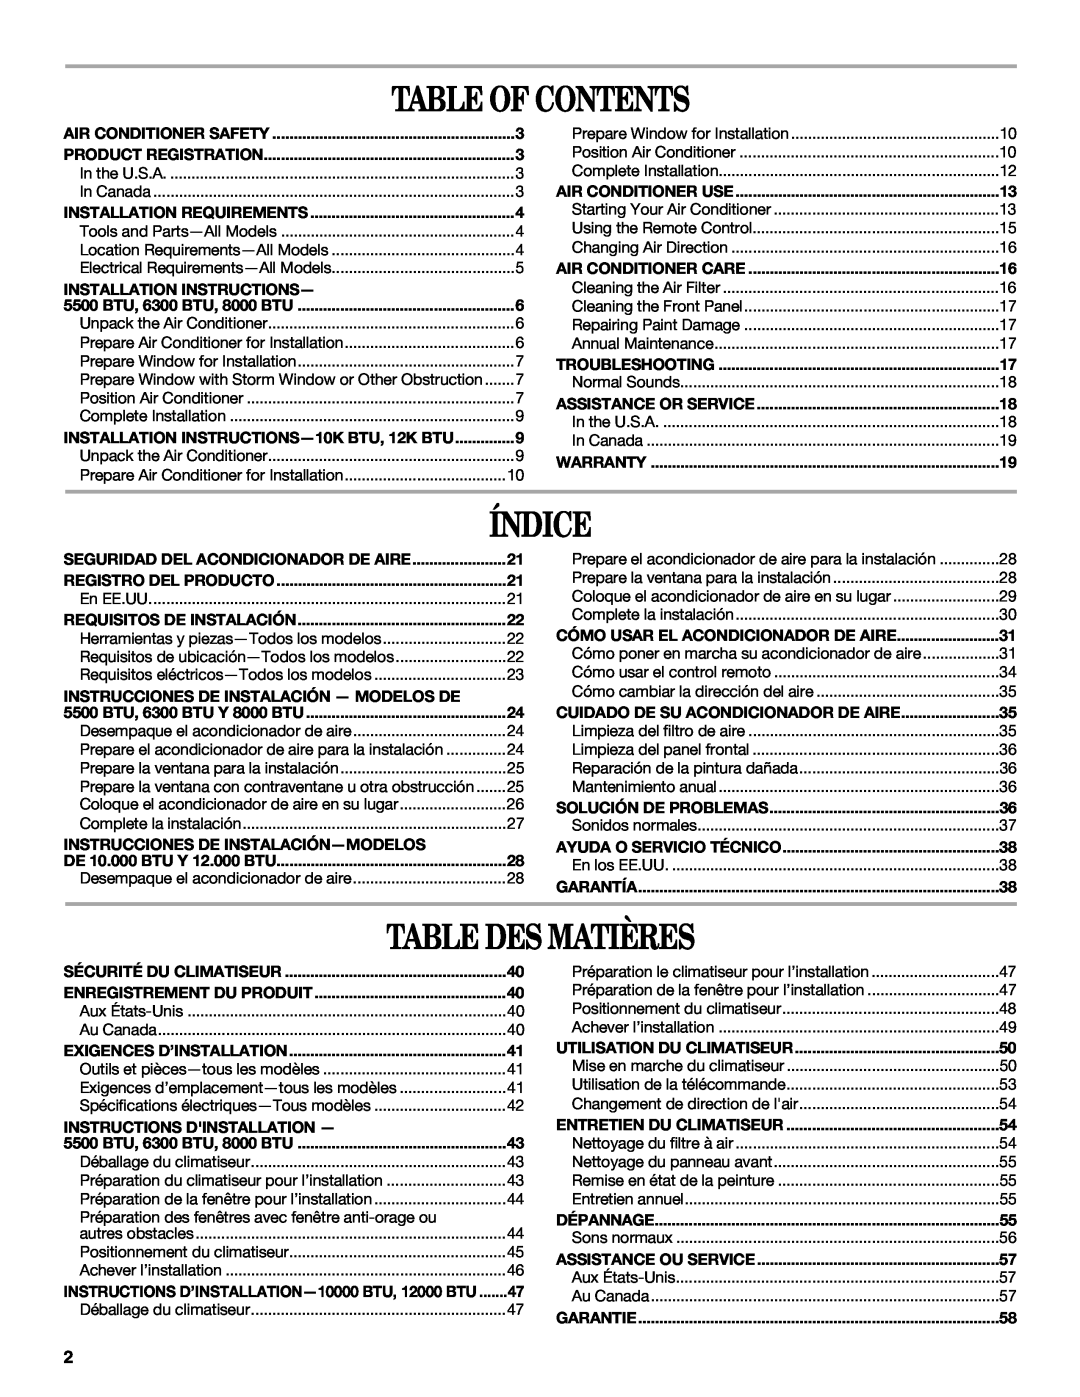 Whirlpool 66161279 manual Table Of Contents, Índice, Table Des Matières 